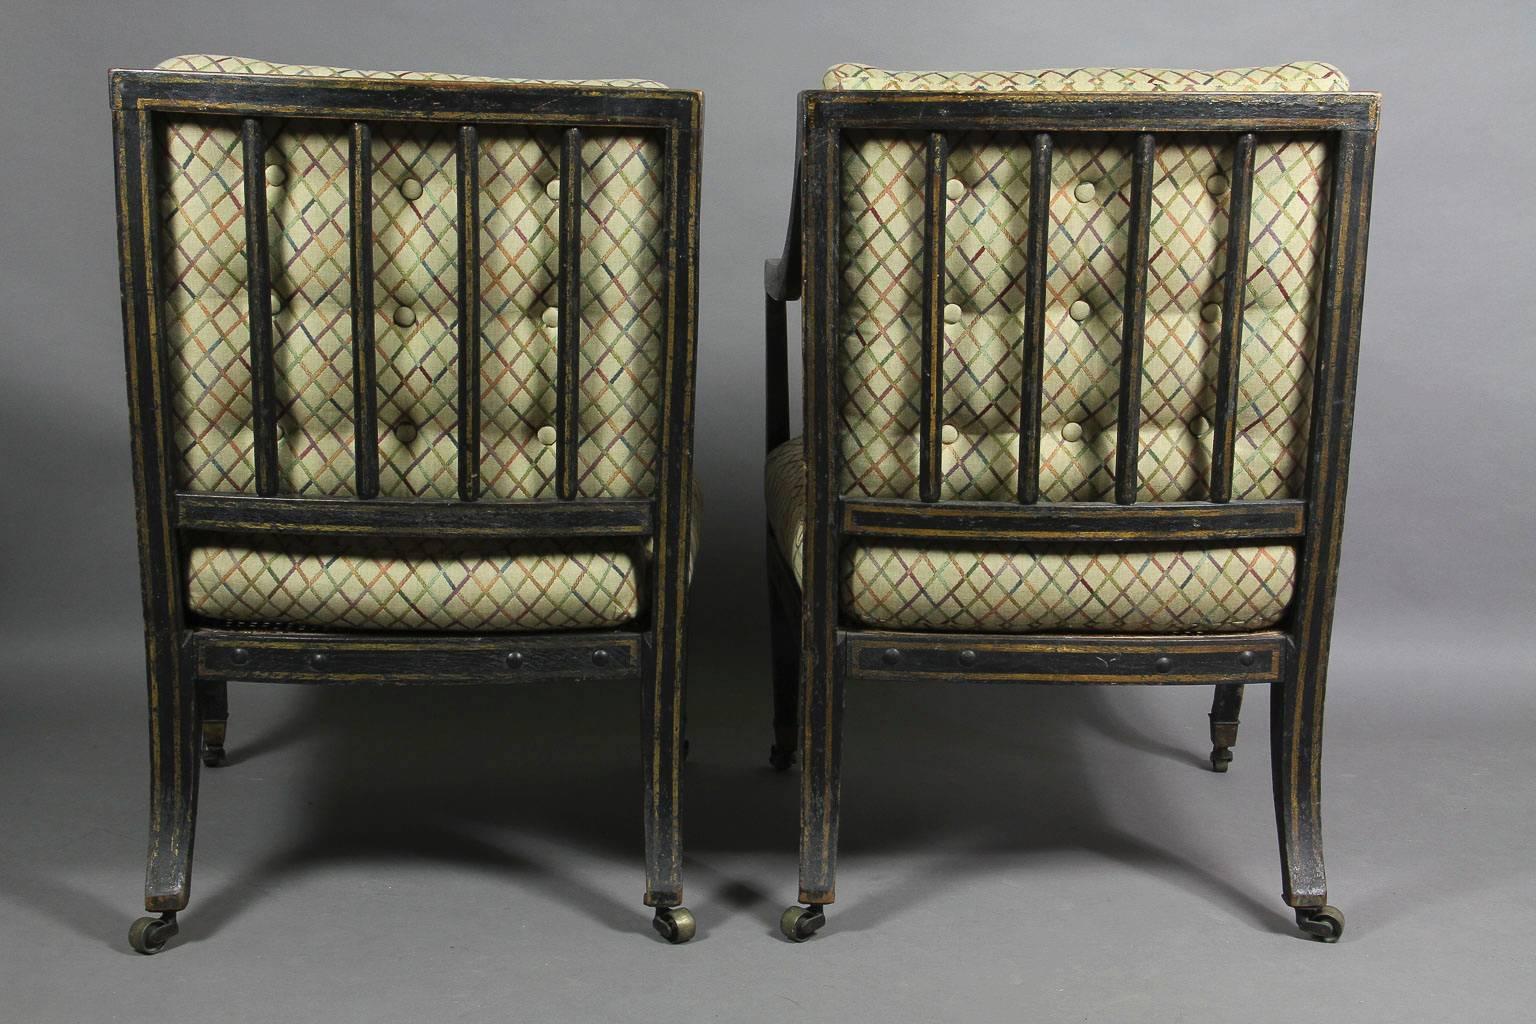 19th Century Pair of Regency Ebonized and Gilded Caned Armchairs